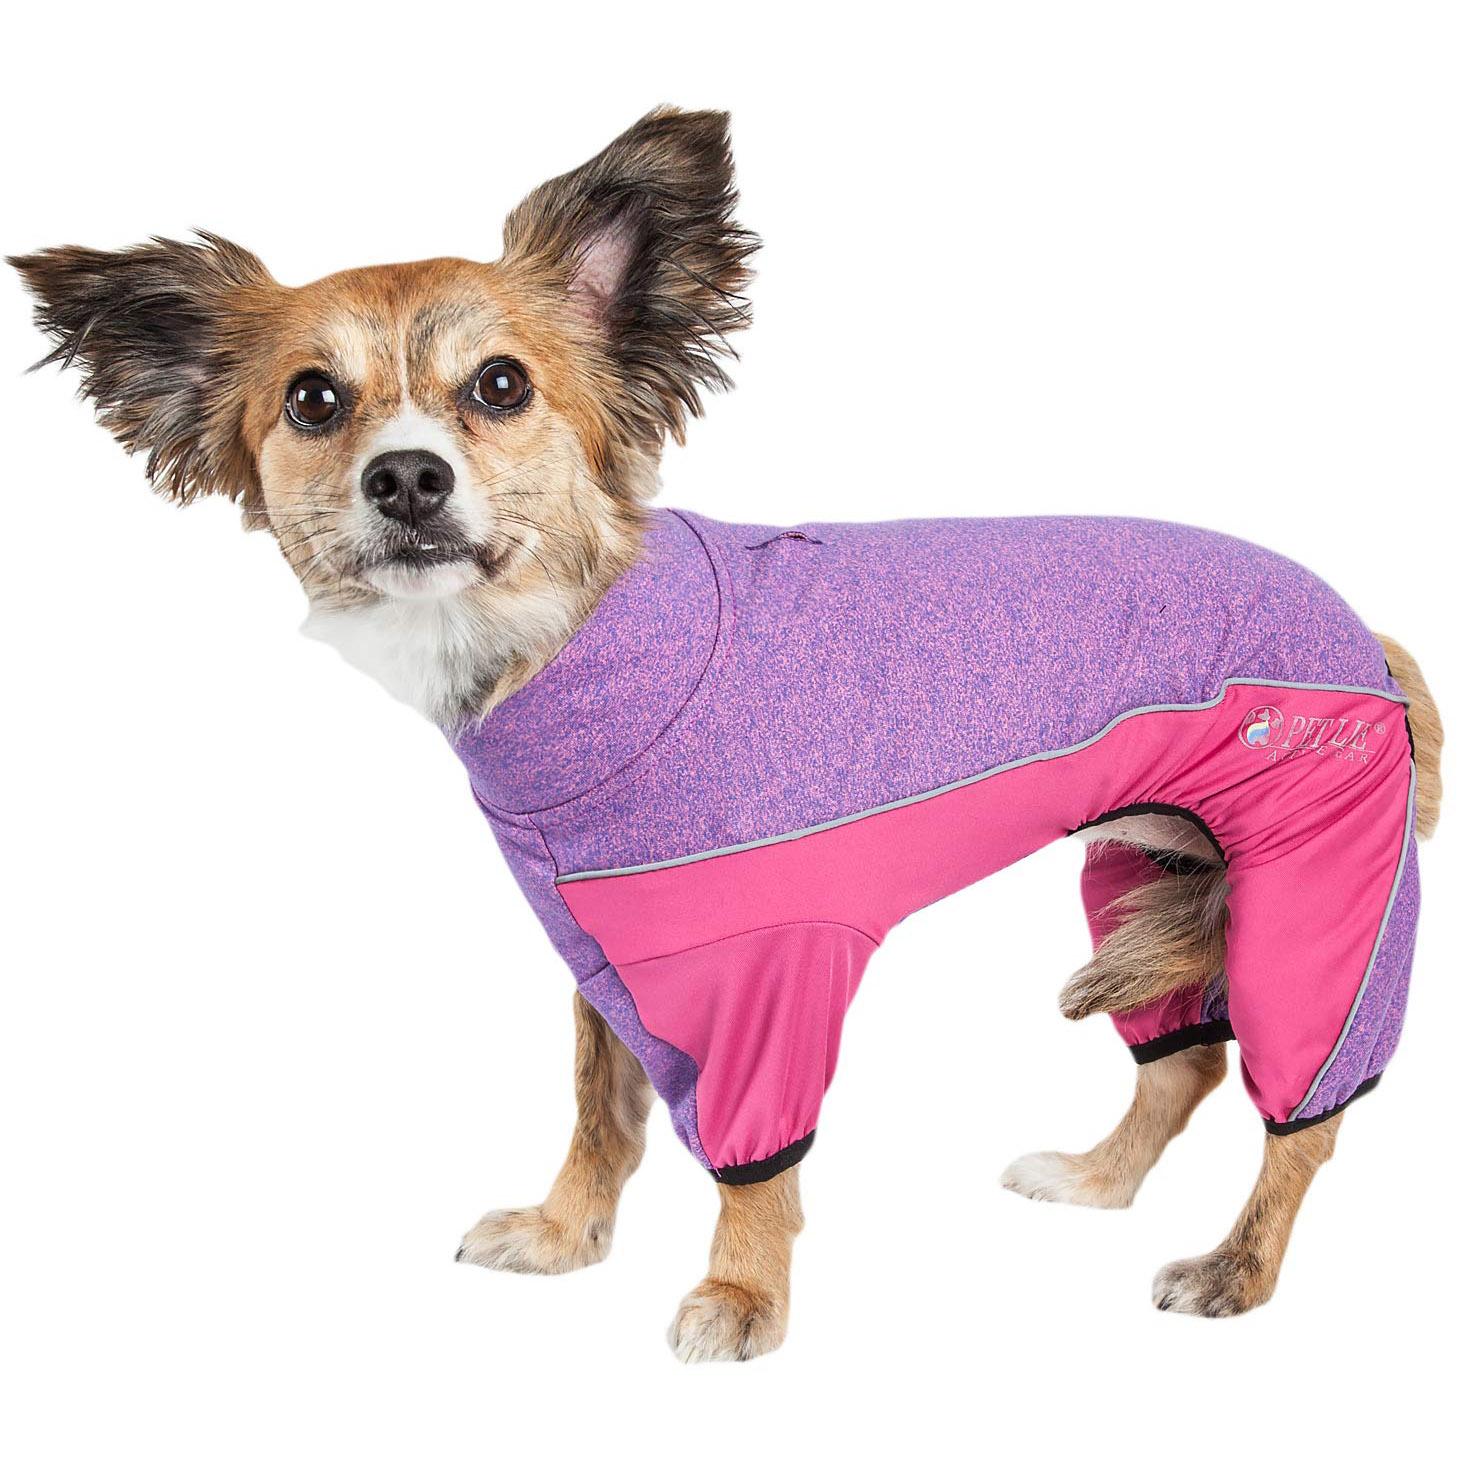 Pet Life ACTIVE Chase Pacer Performance Full Body Dog Warm Up - Pink and Purple